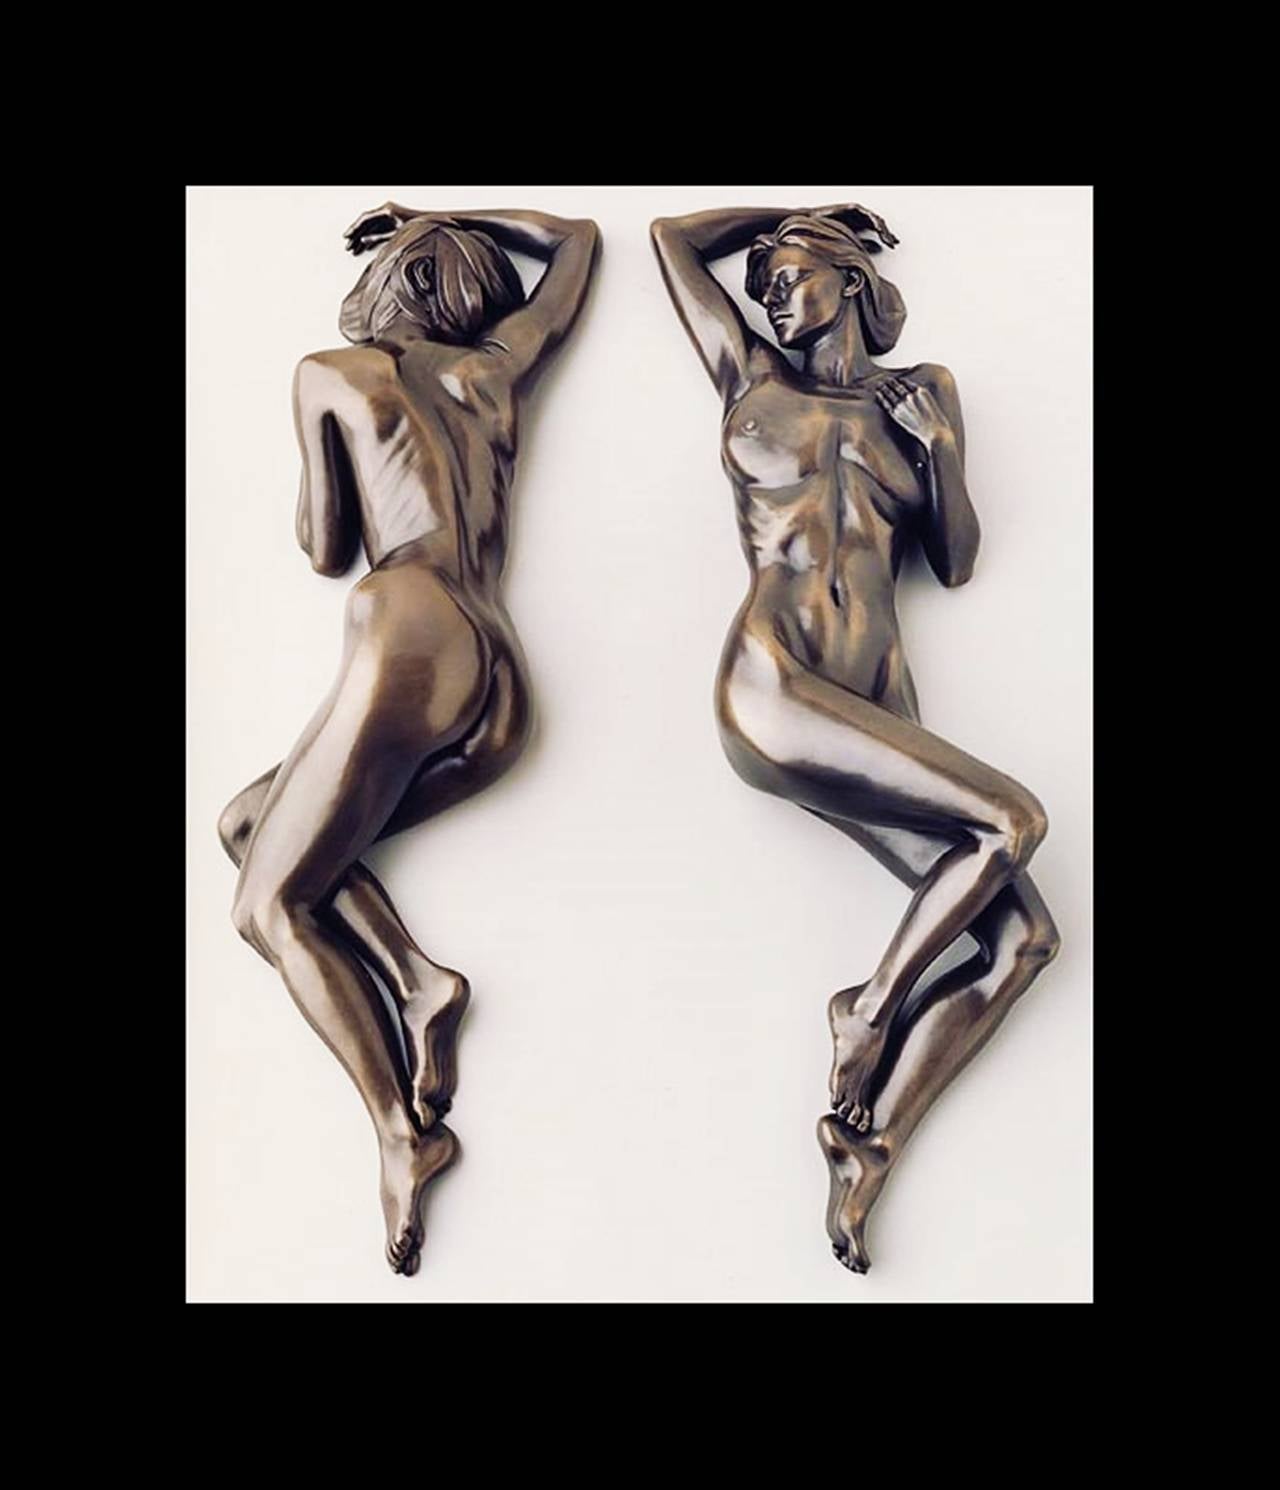 Diptych bronze sculpture by the Southern California sculpture Tanya Ragir. The sculpture is a limited edition of nine and this set is #5/9 executed in bronze and it comes signed, dated and numbered by the artist.

Measurements: 6